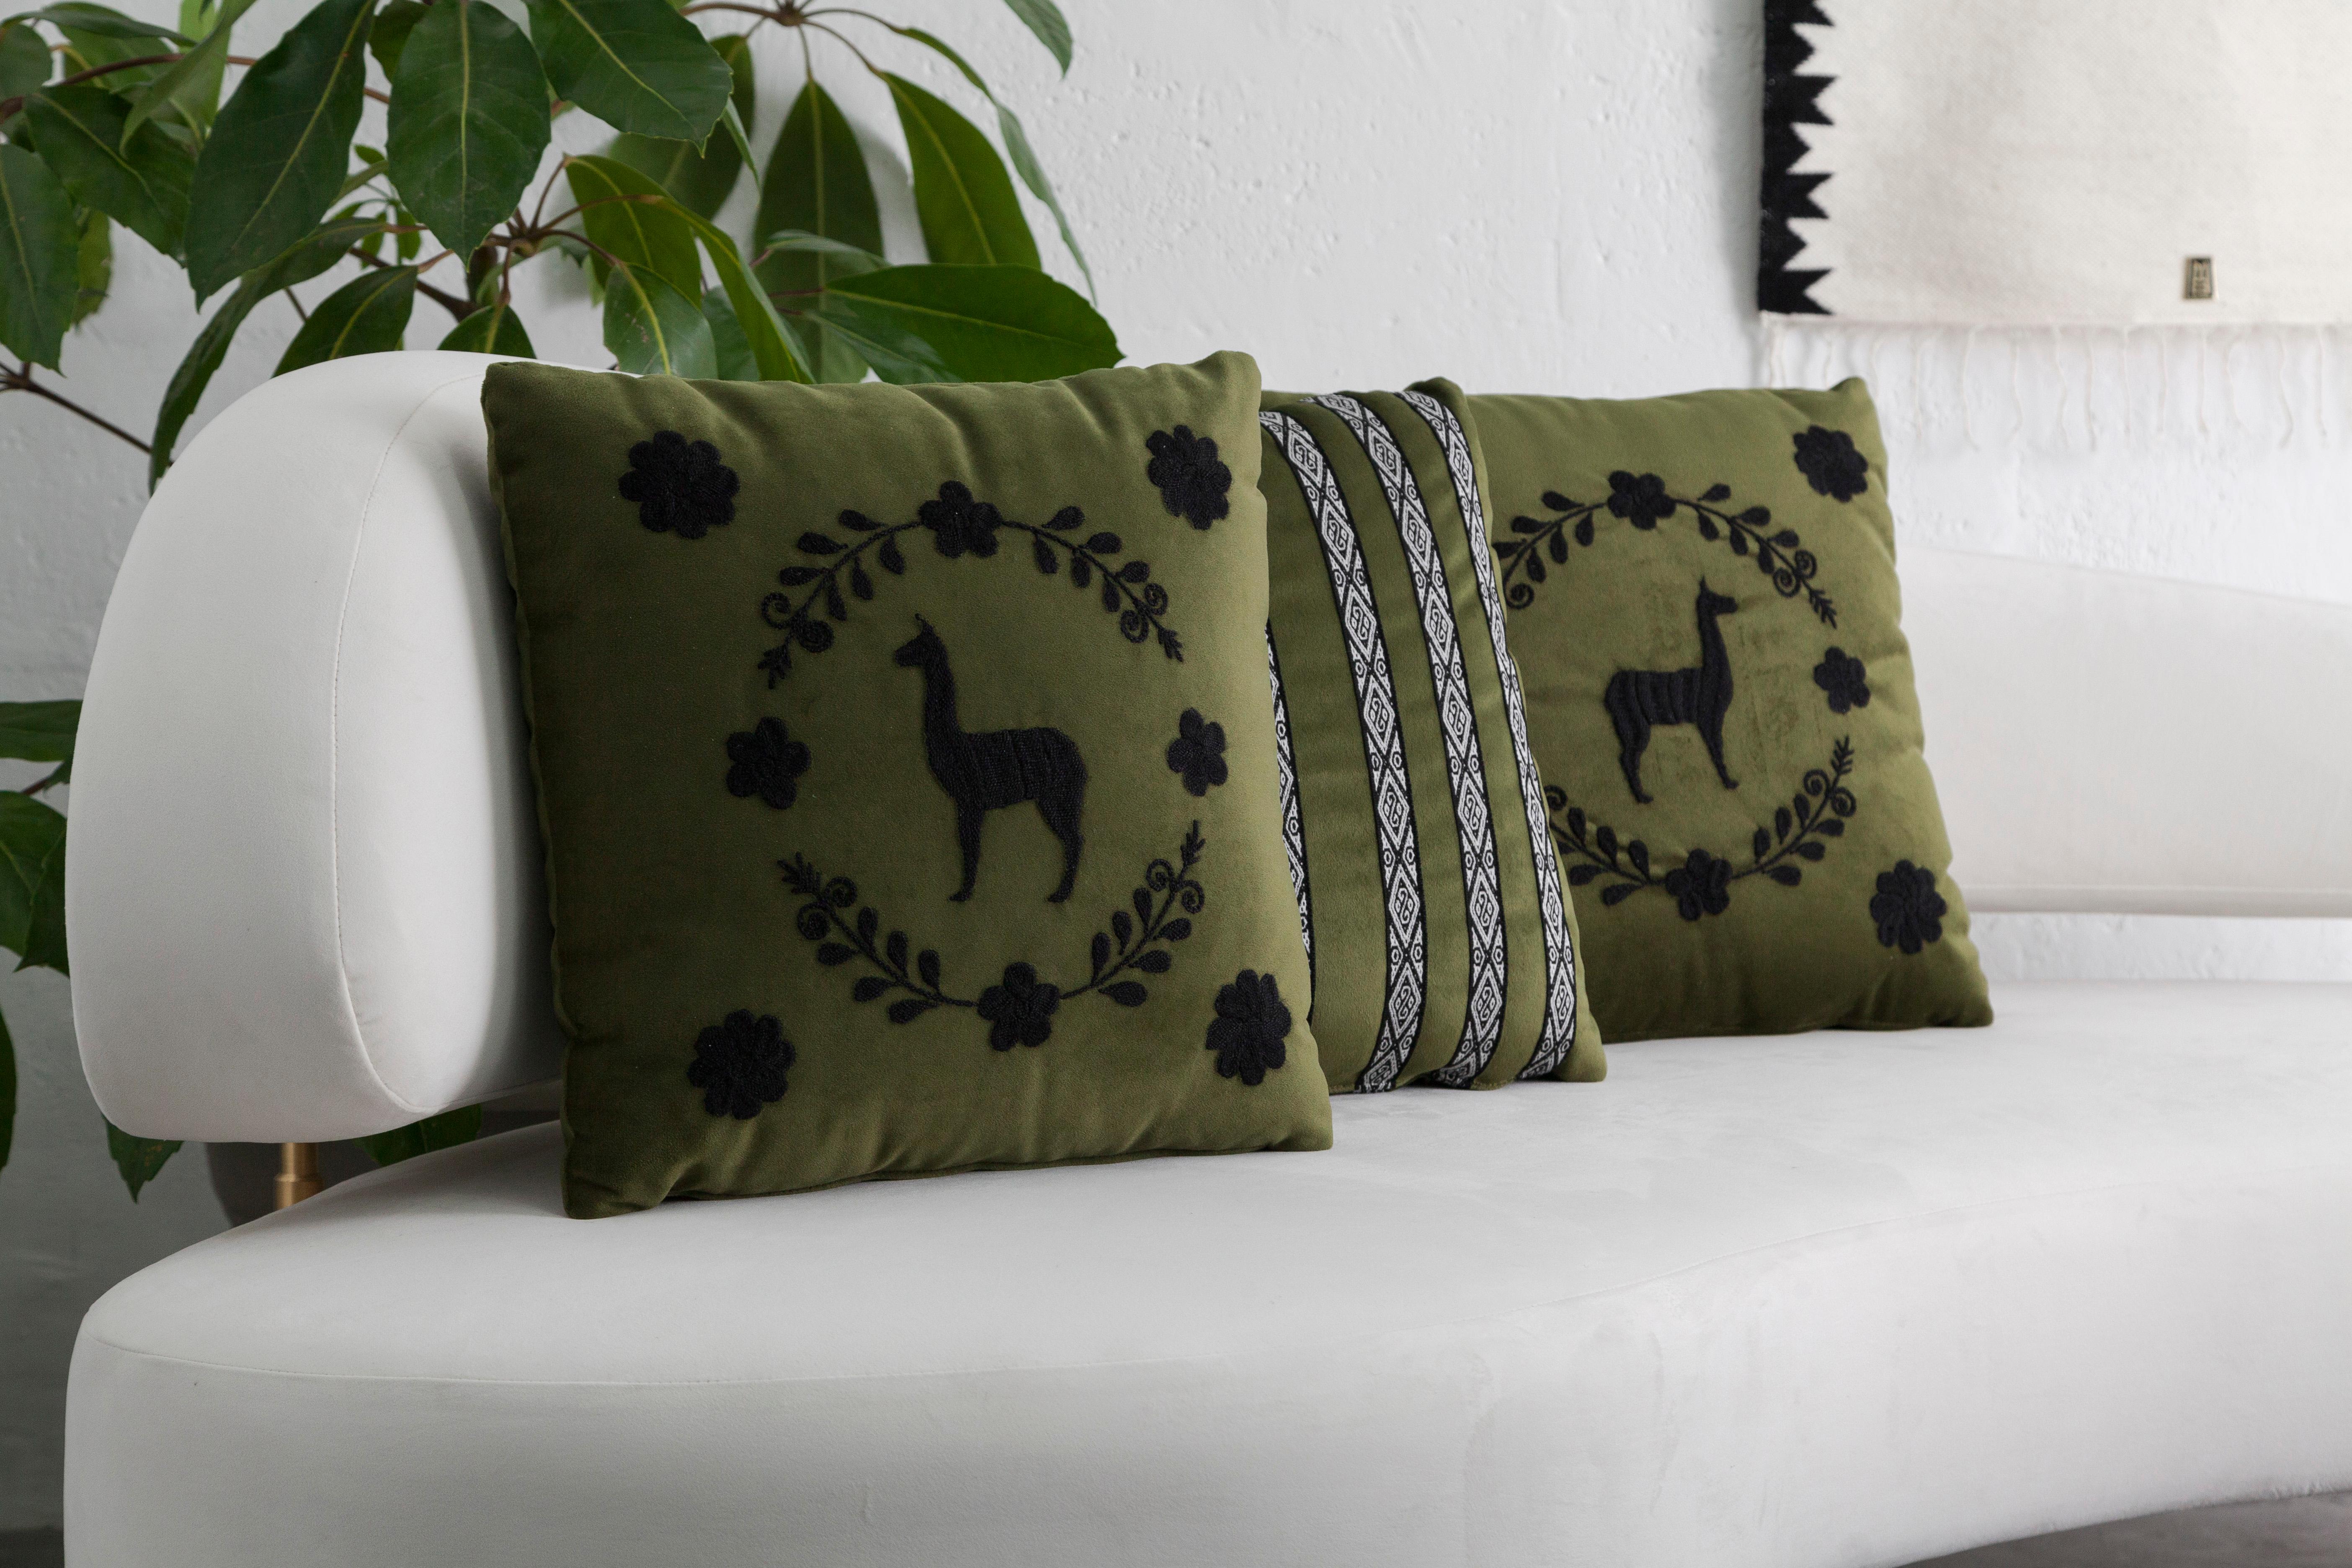 Upholstery LLAMA Hand Embroidered Decorative Pillows in Olive Velvet by ANDEAN, Set of 2 For Sale